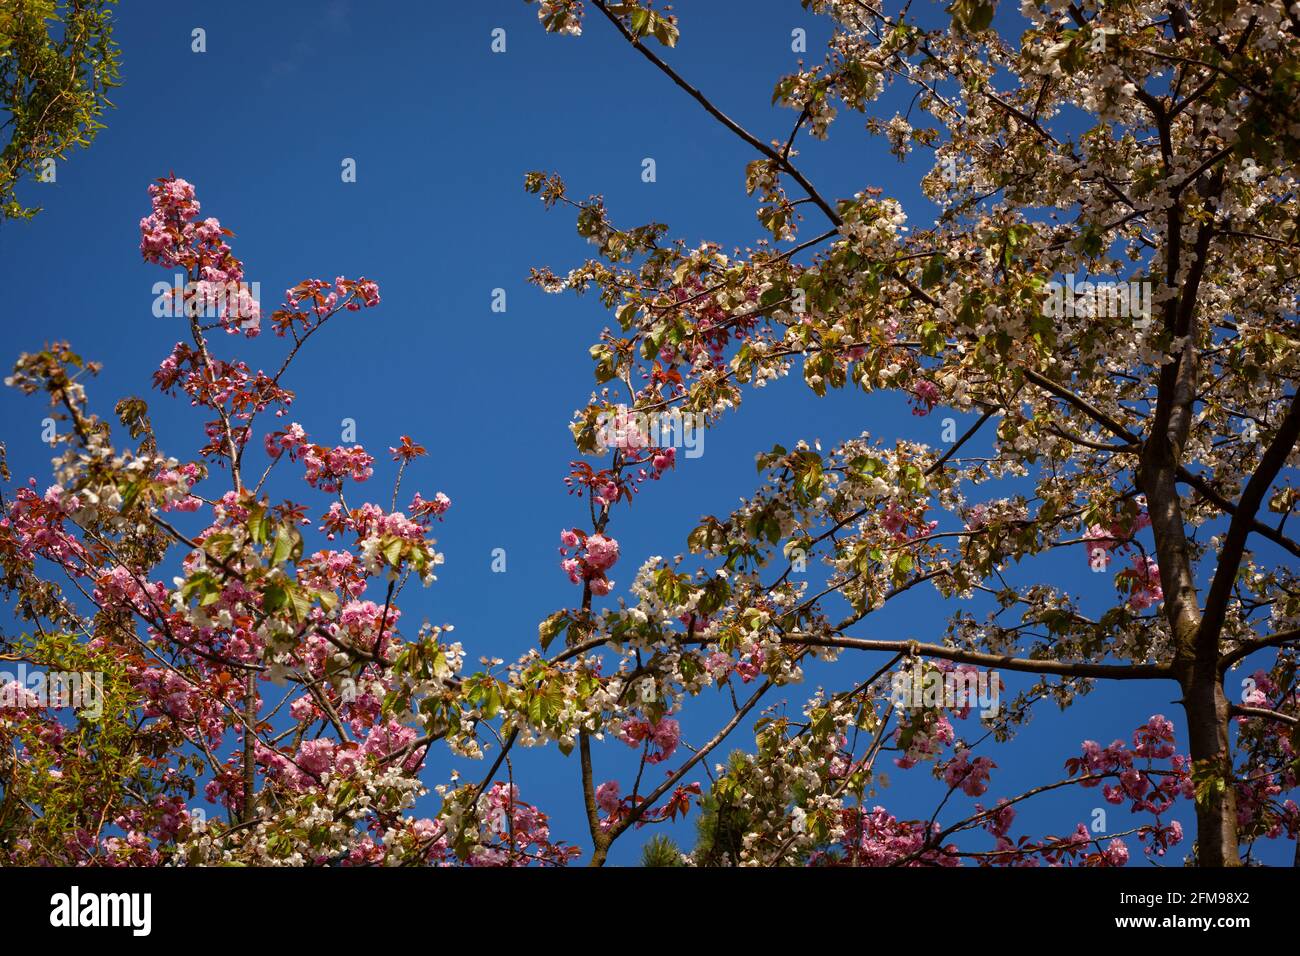 White and pink cherry blossoms against bright blue sky Stock Photo